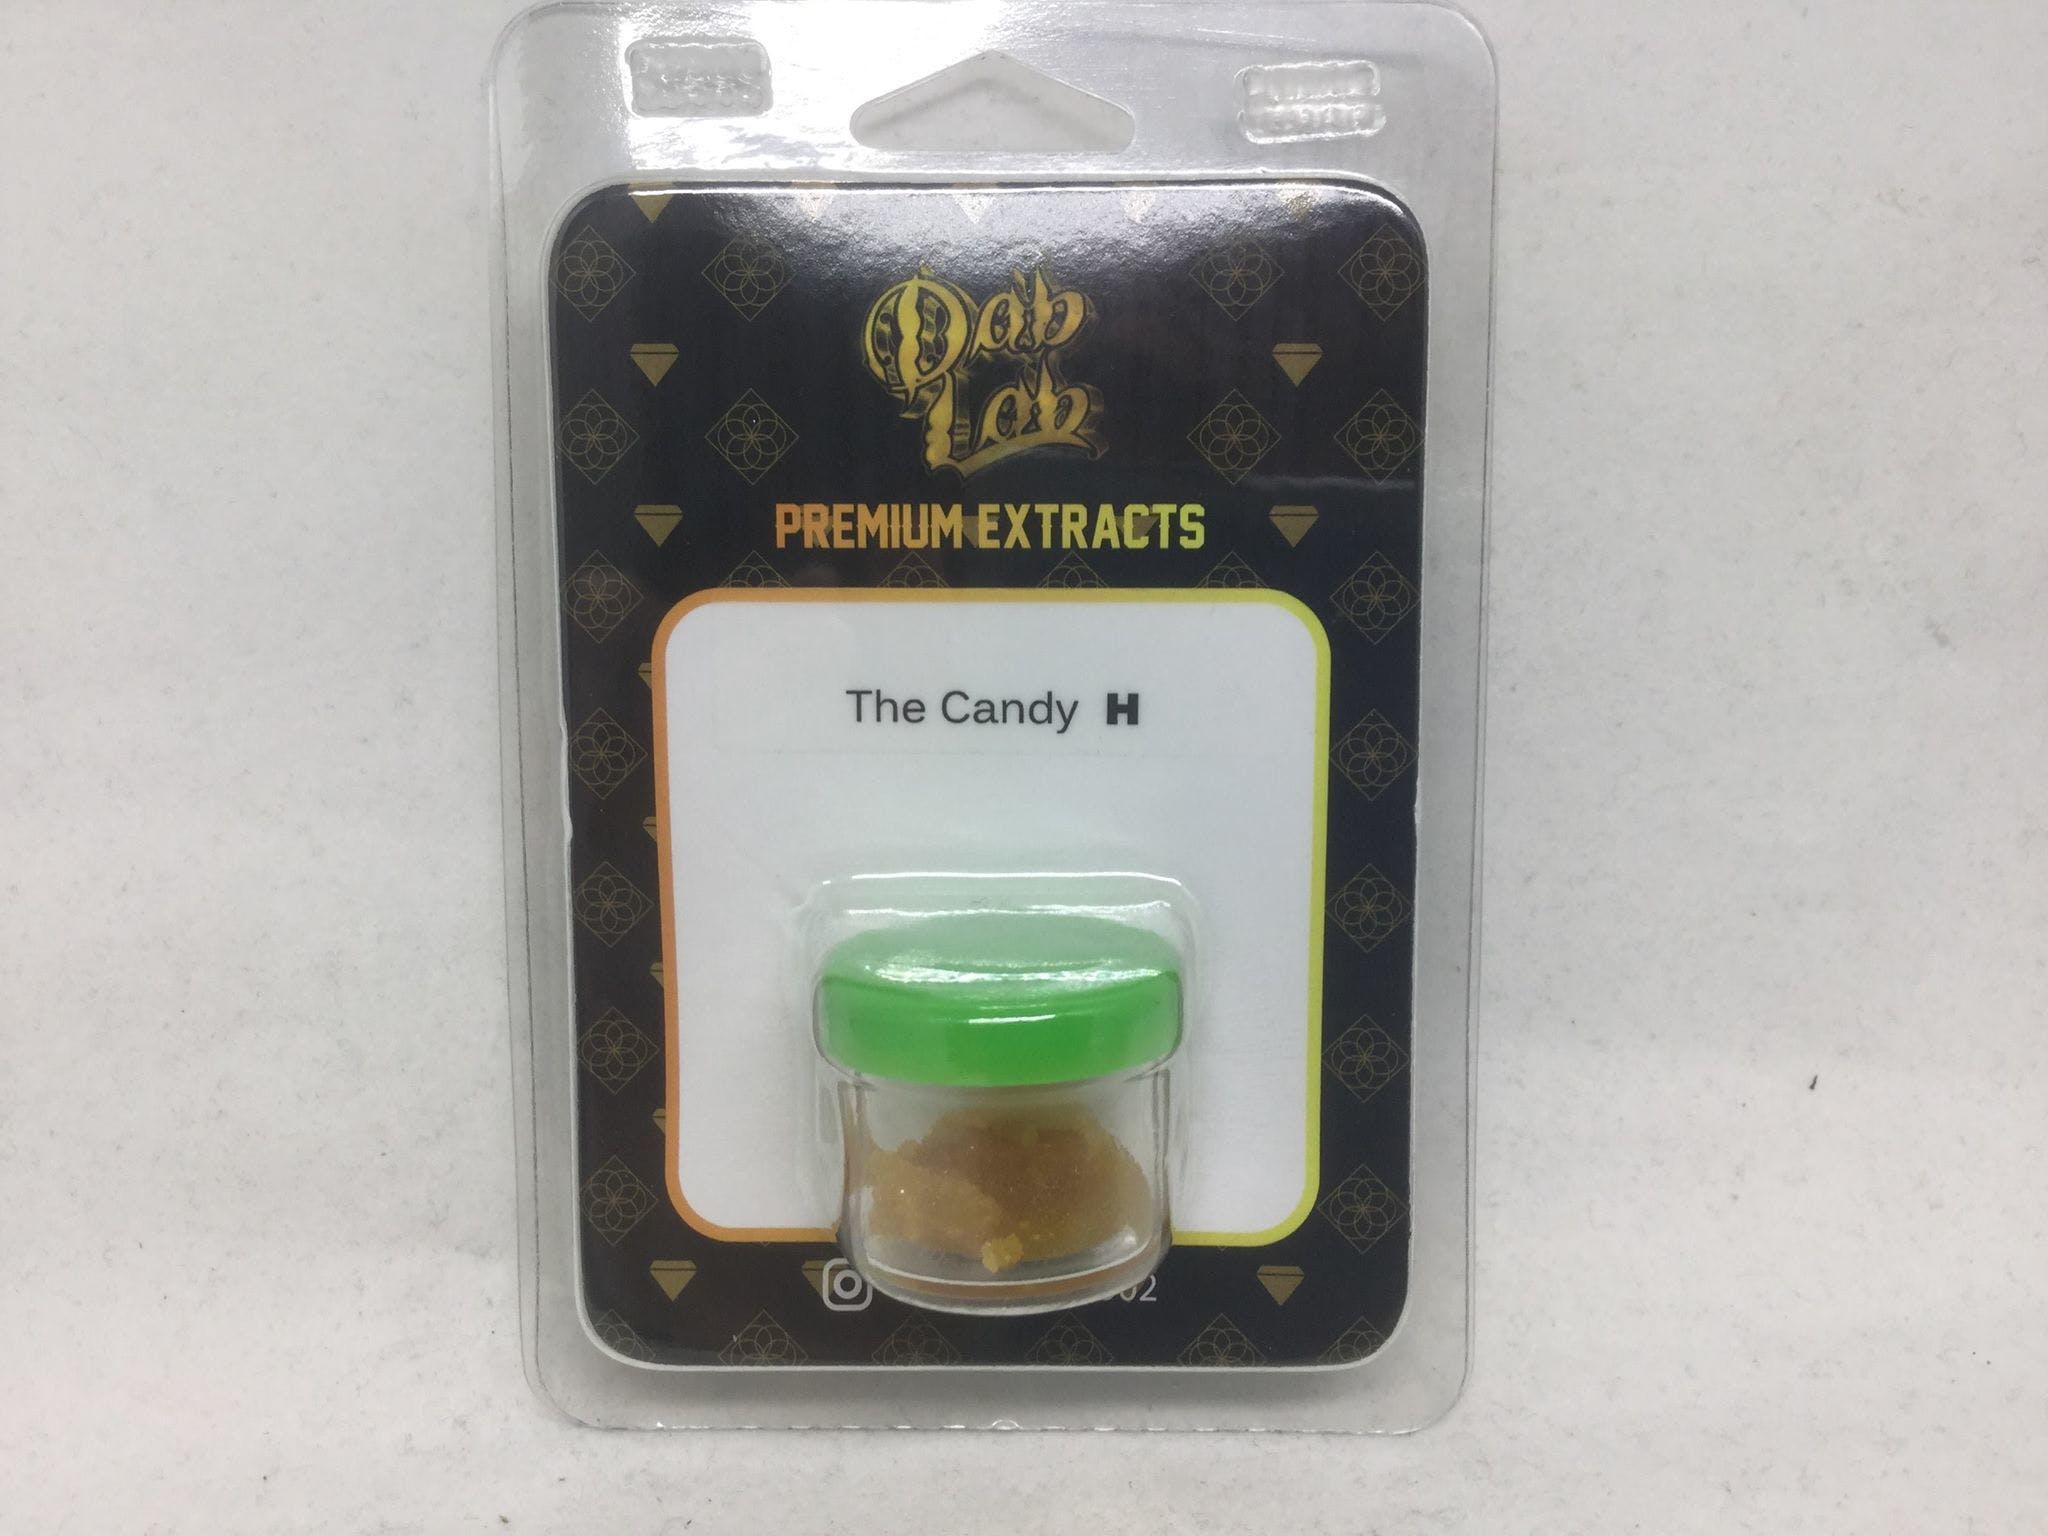 marijuana-dispensaries-234-division-st-nw-olympia-dab-lab-the-candy